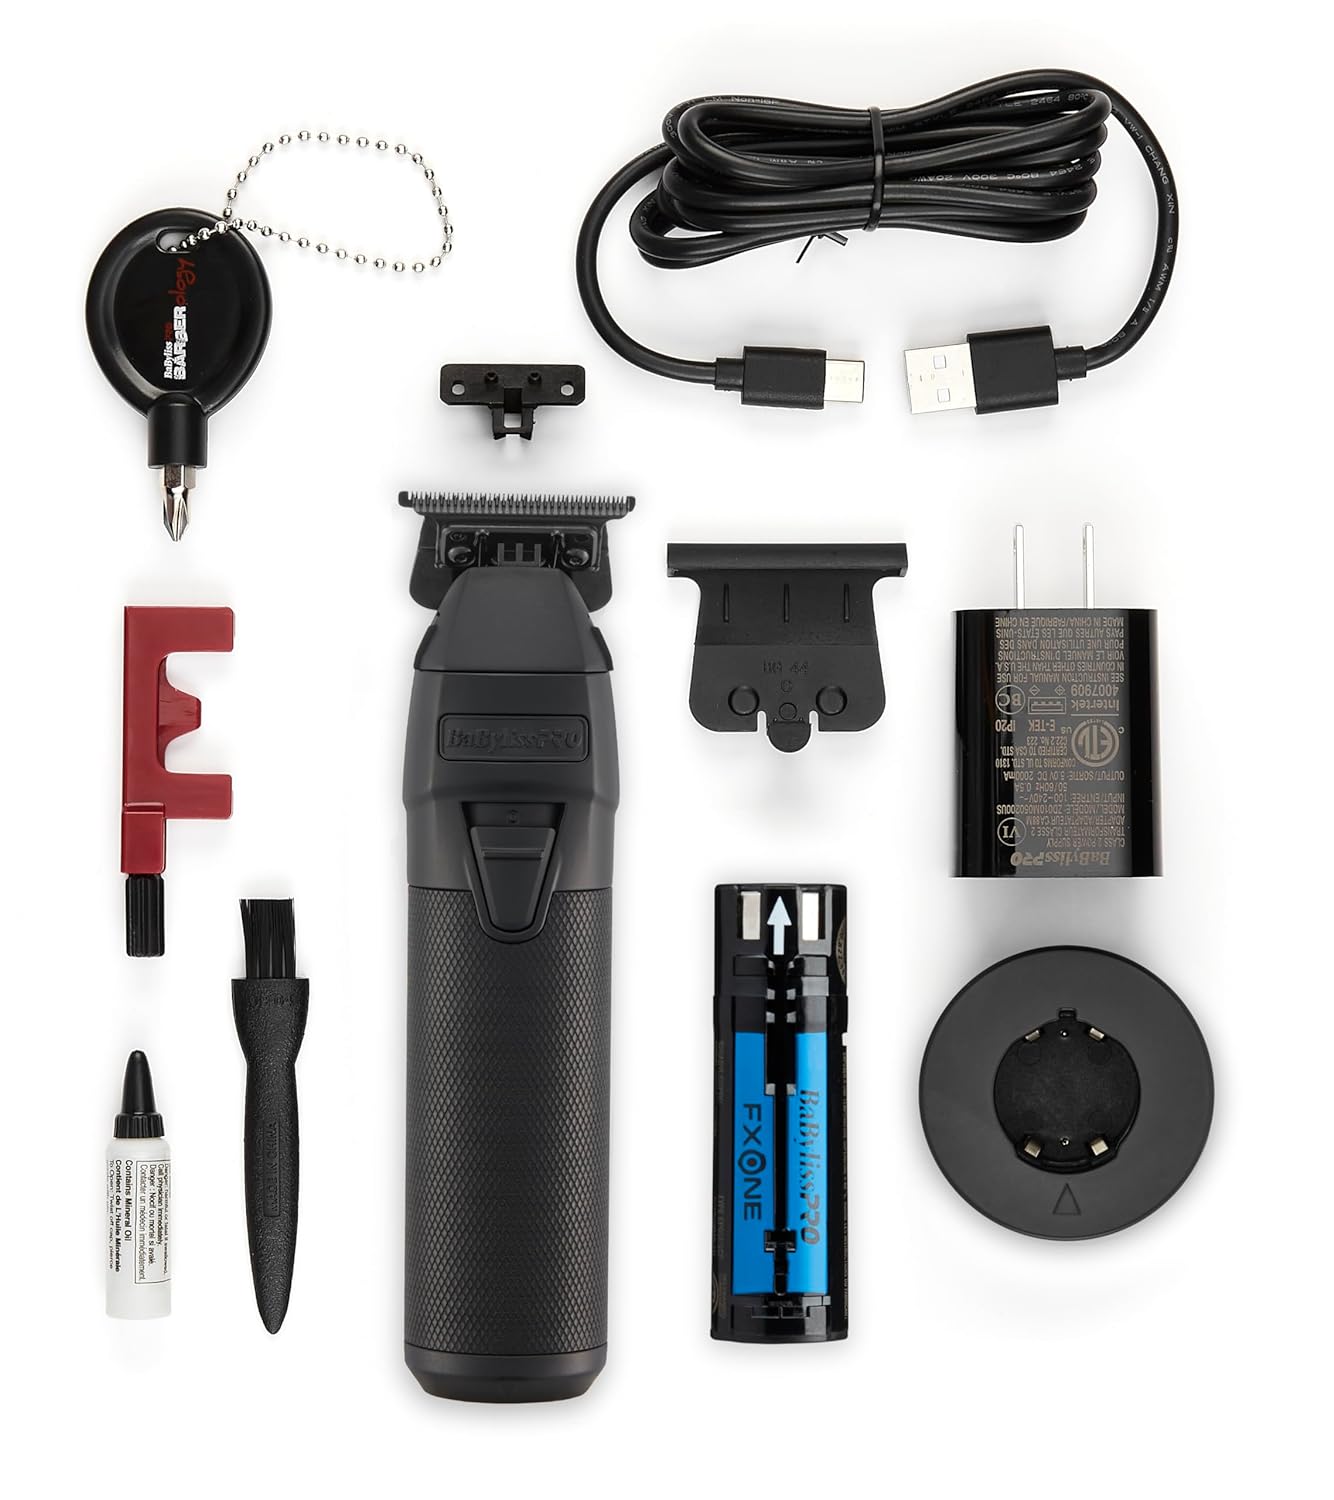 BaBylissPRO FXONE BlackFX Trimmer with 4-in-1 TurboJet Air Duster